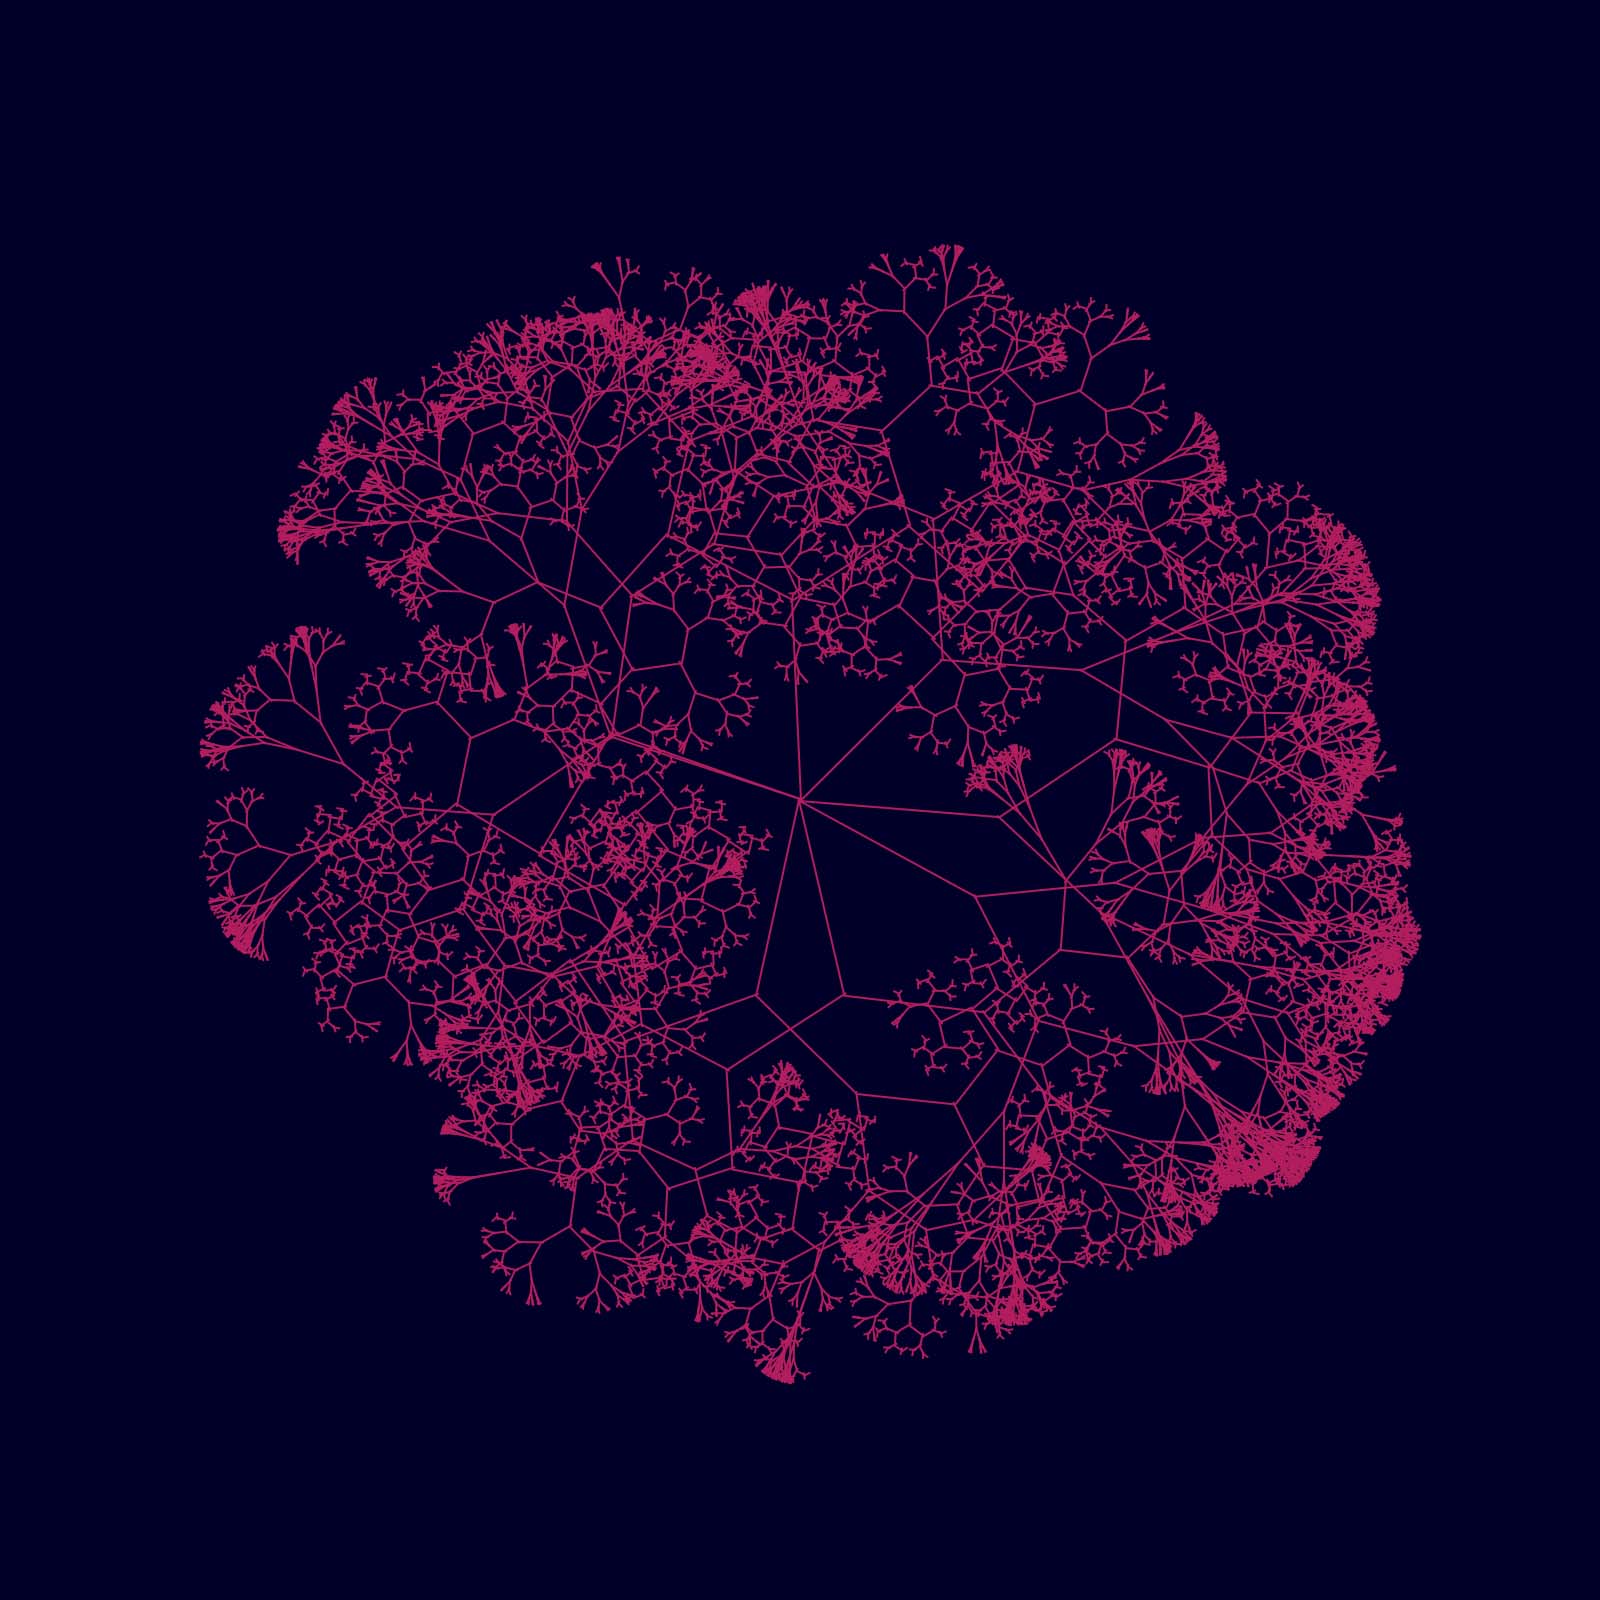 p5.js example